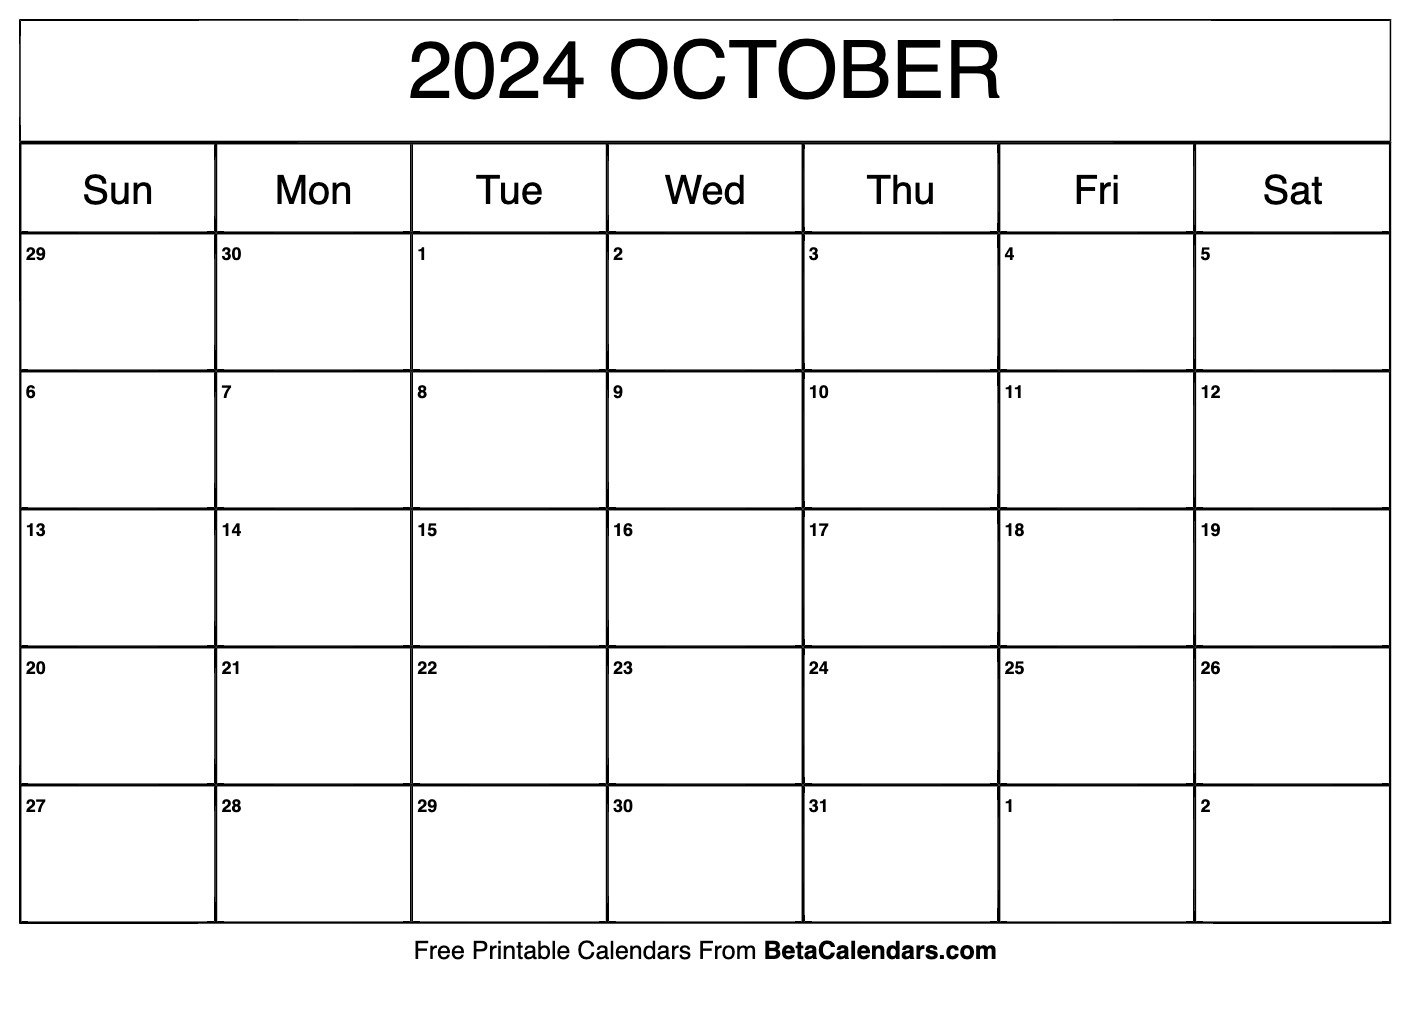 Free Printable October 2024 Calendar with Free Printable Blank October Calendar 2024